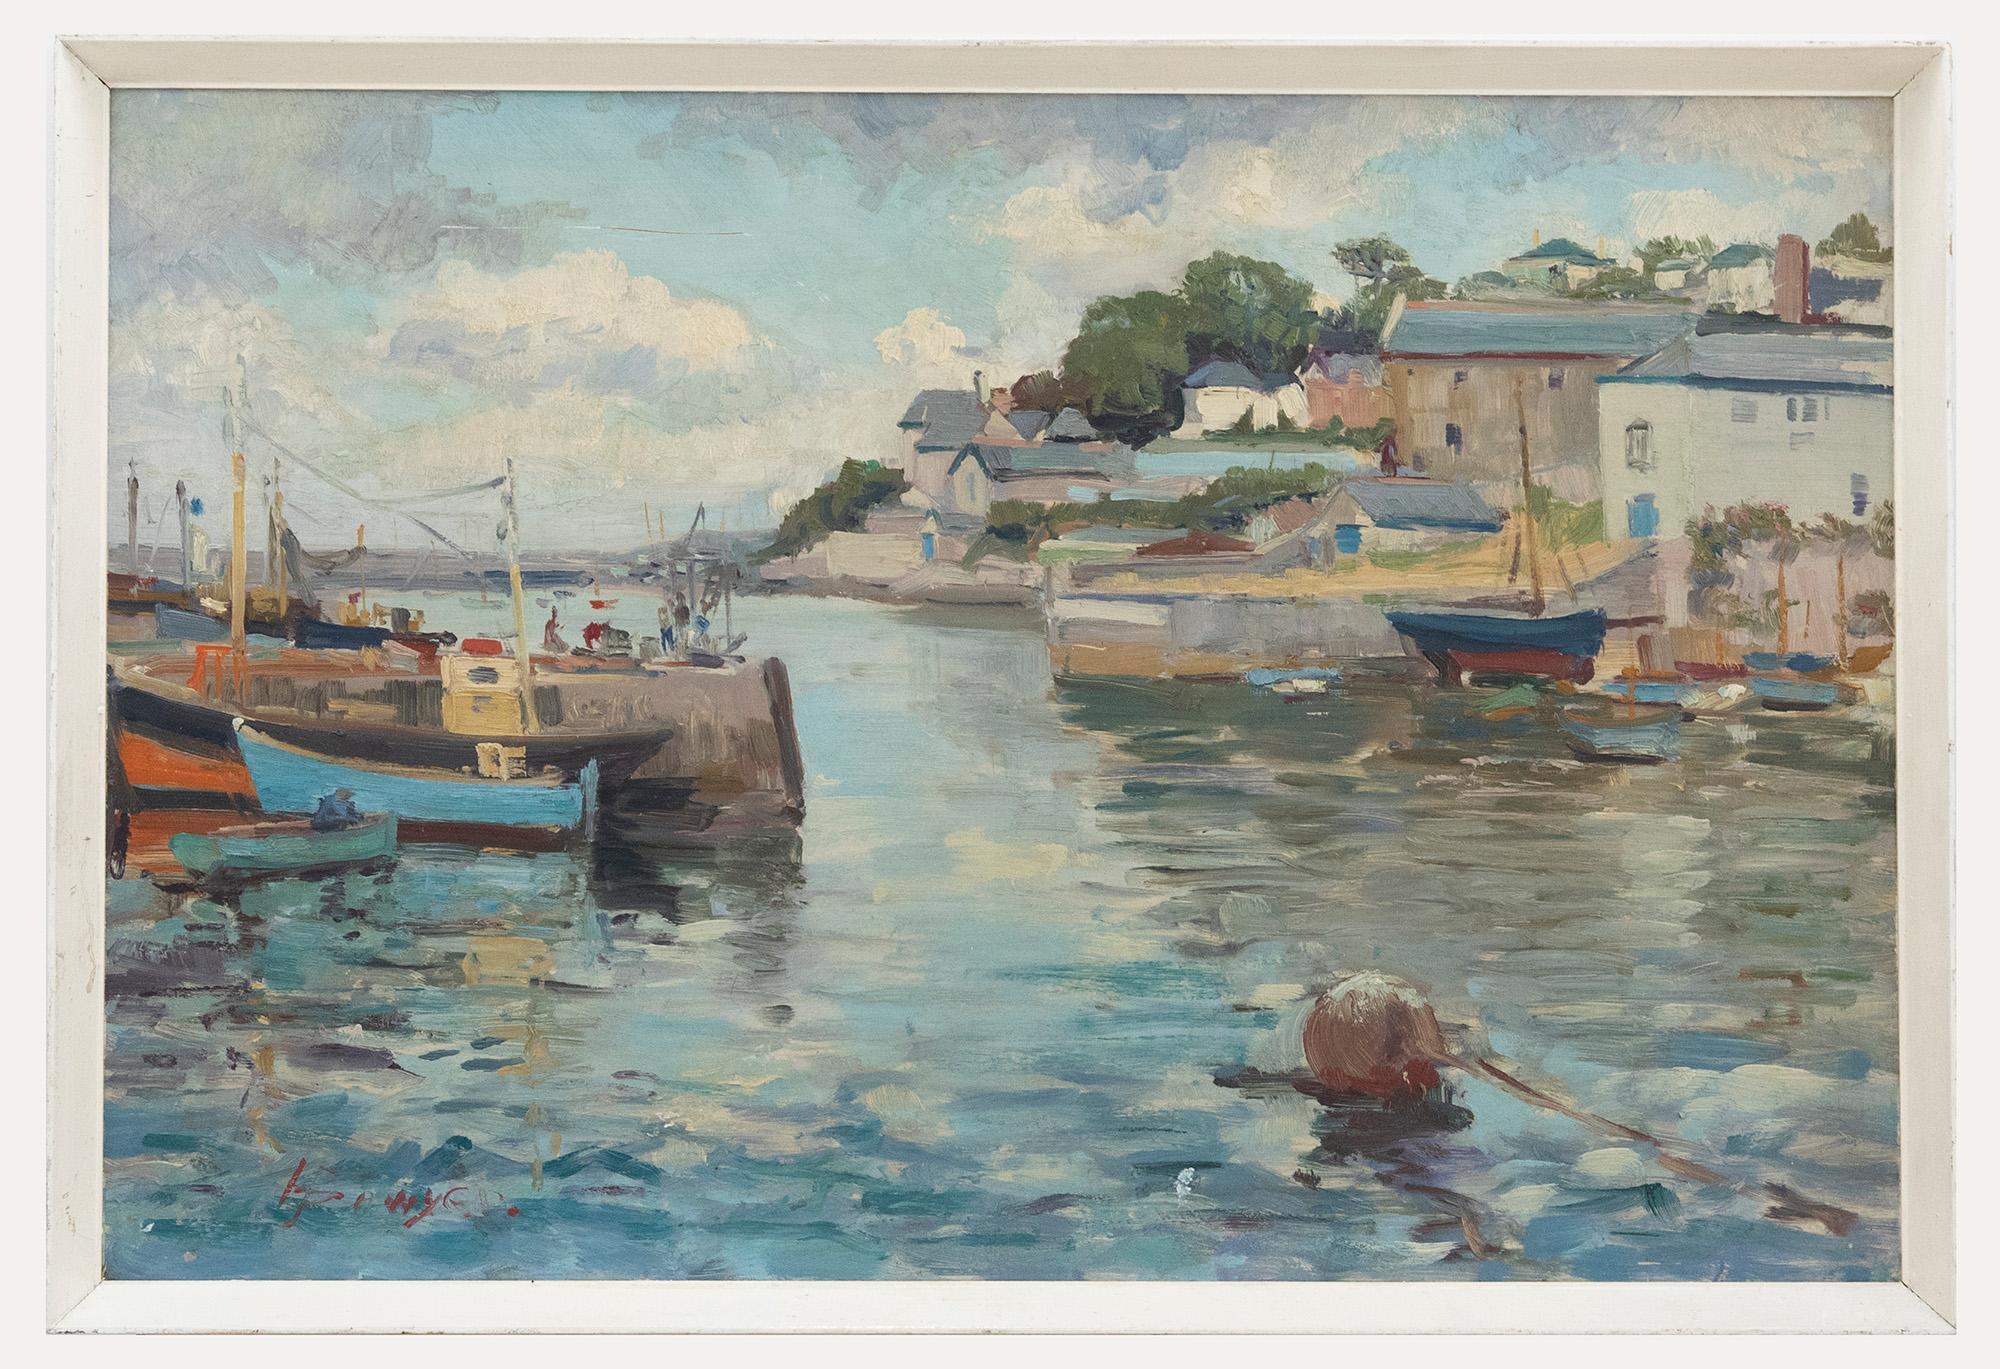 A charming study of a Cornish harbour with fishing boats moored along the shoreline. The artist captures the scene in a loose impressionist style using bursts of colour to bring a sense of vibrancy to the composition. Signed to the lower right.